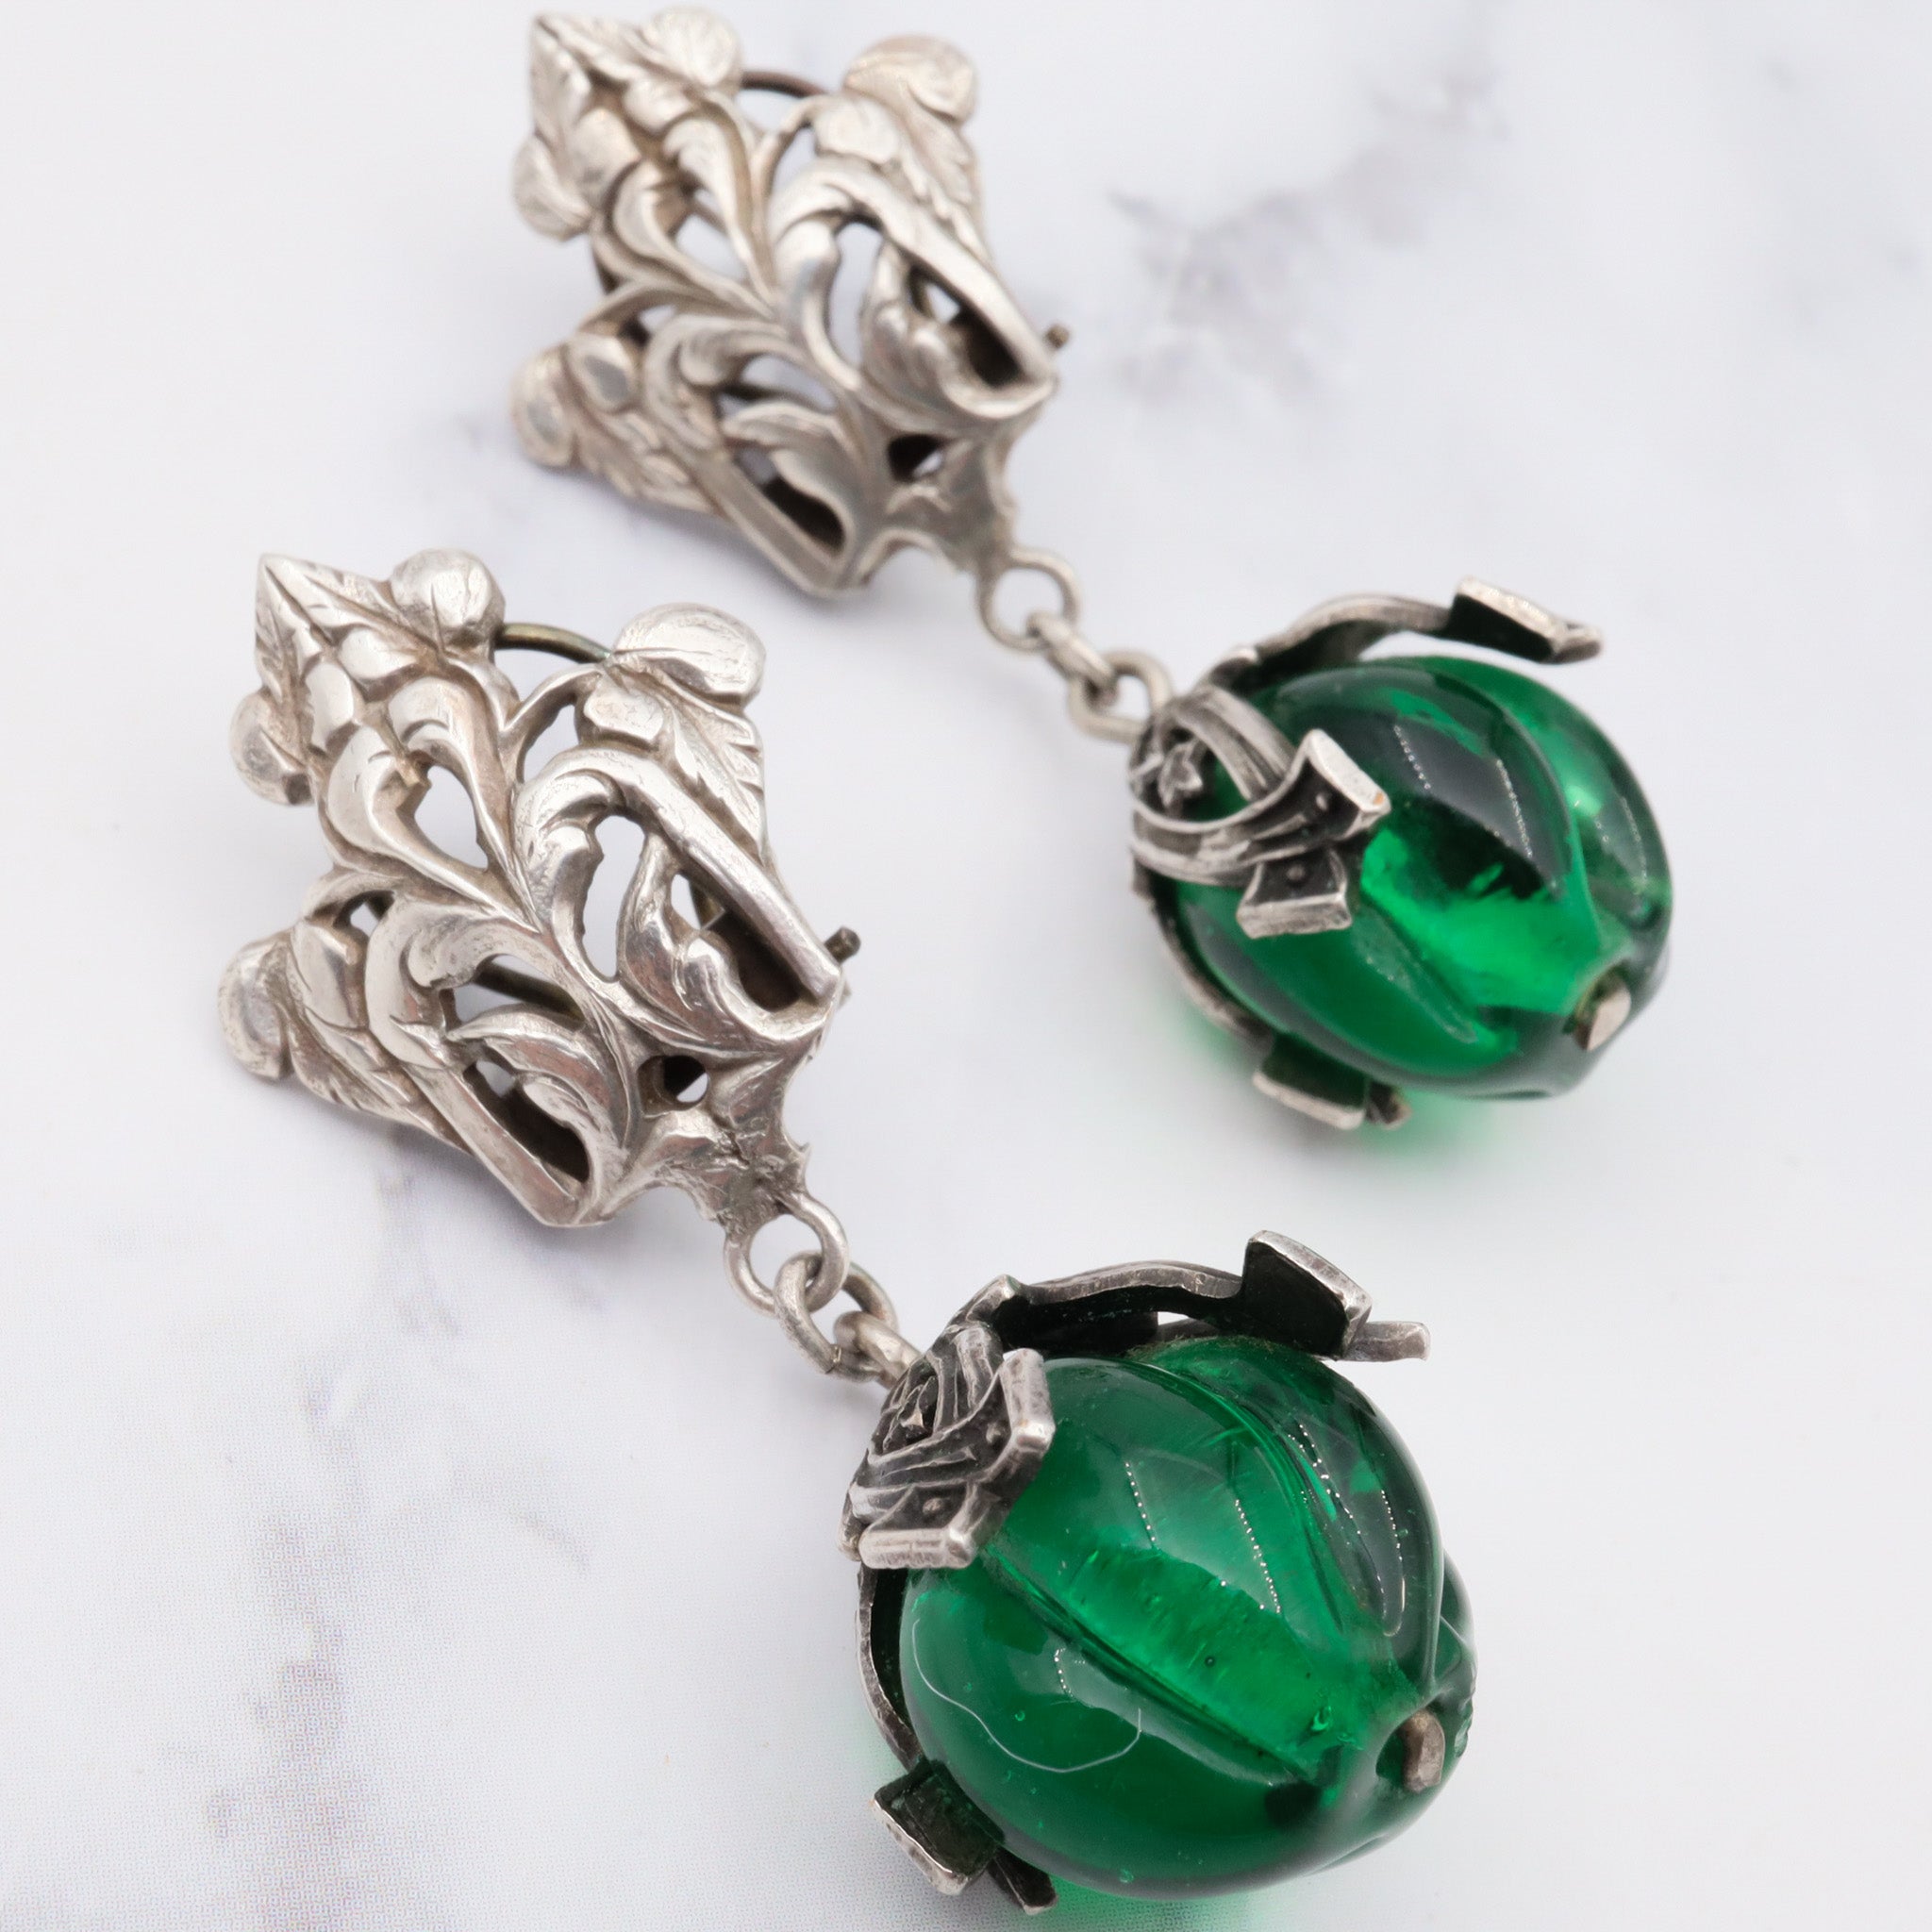 Antique Victorian Renaissance Revival silver plated carved green glass drop bead earrings